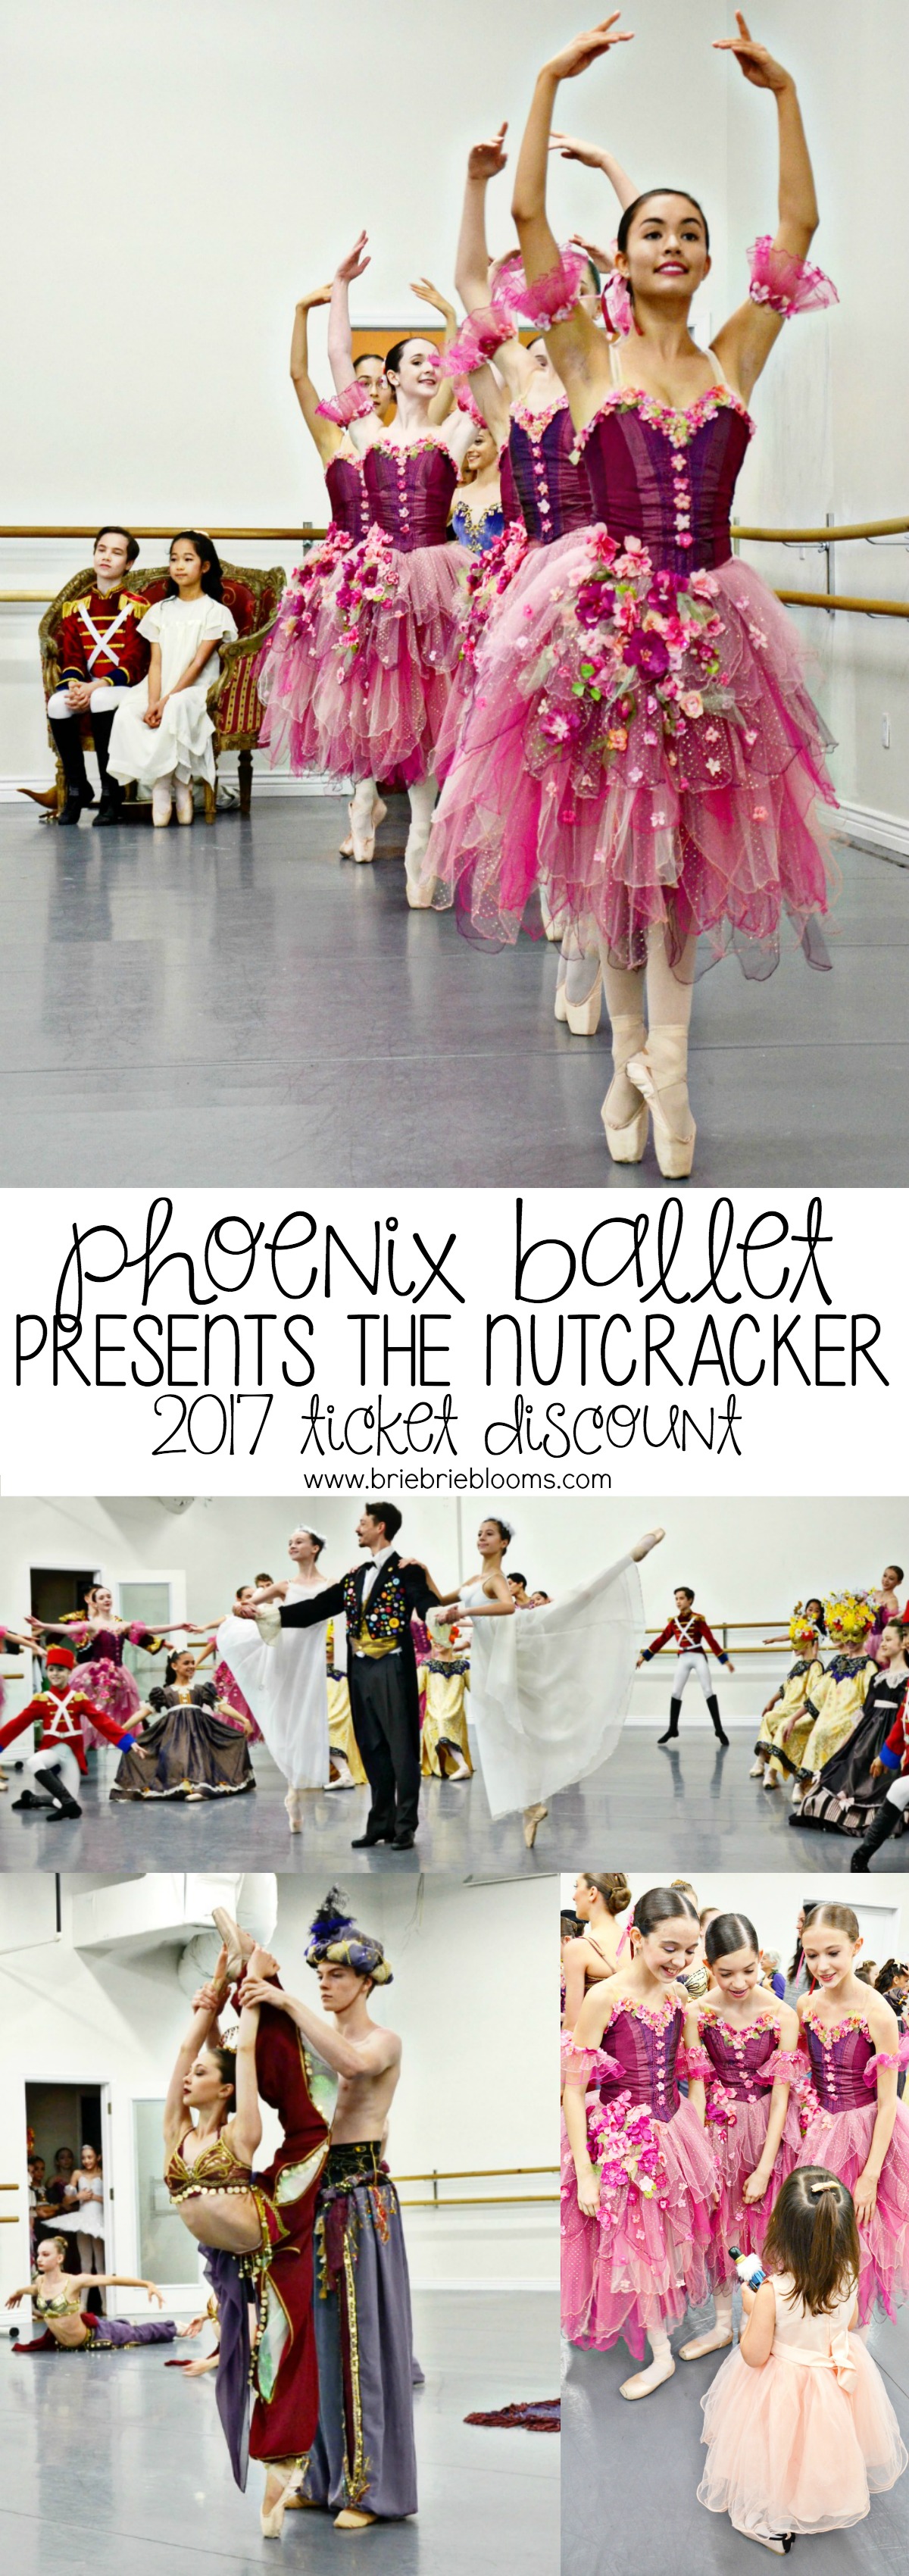 Purchase tickets to the Phoenix Ballet presents The Nutcracker with a 2017 ticket discount for a wonderful holiday show this season.